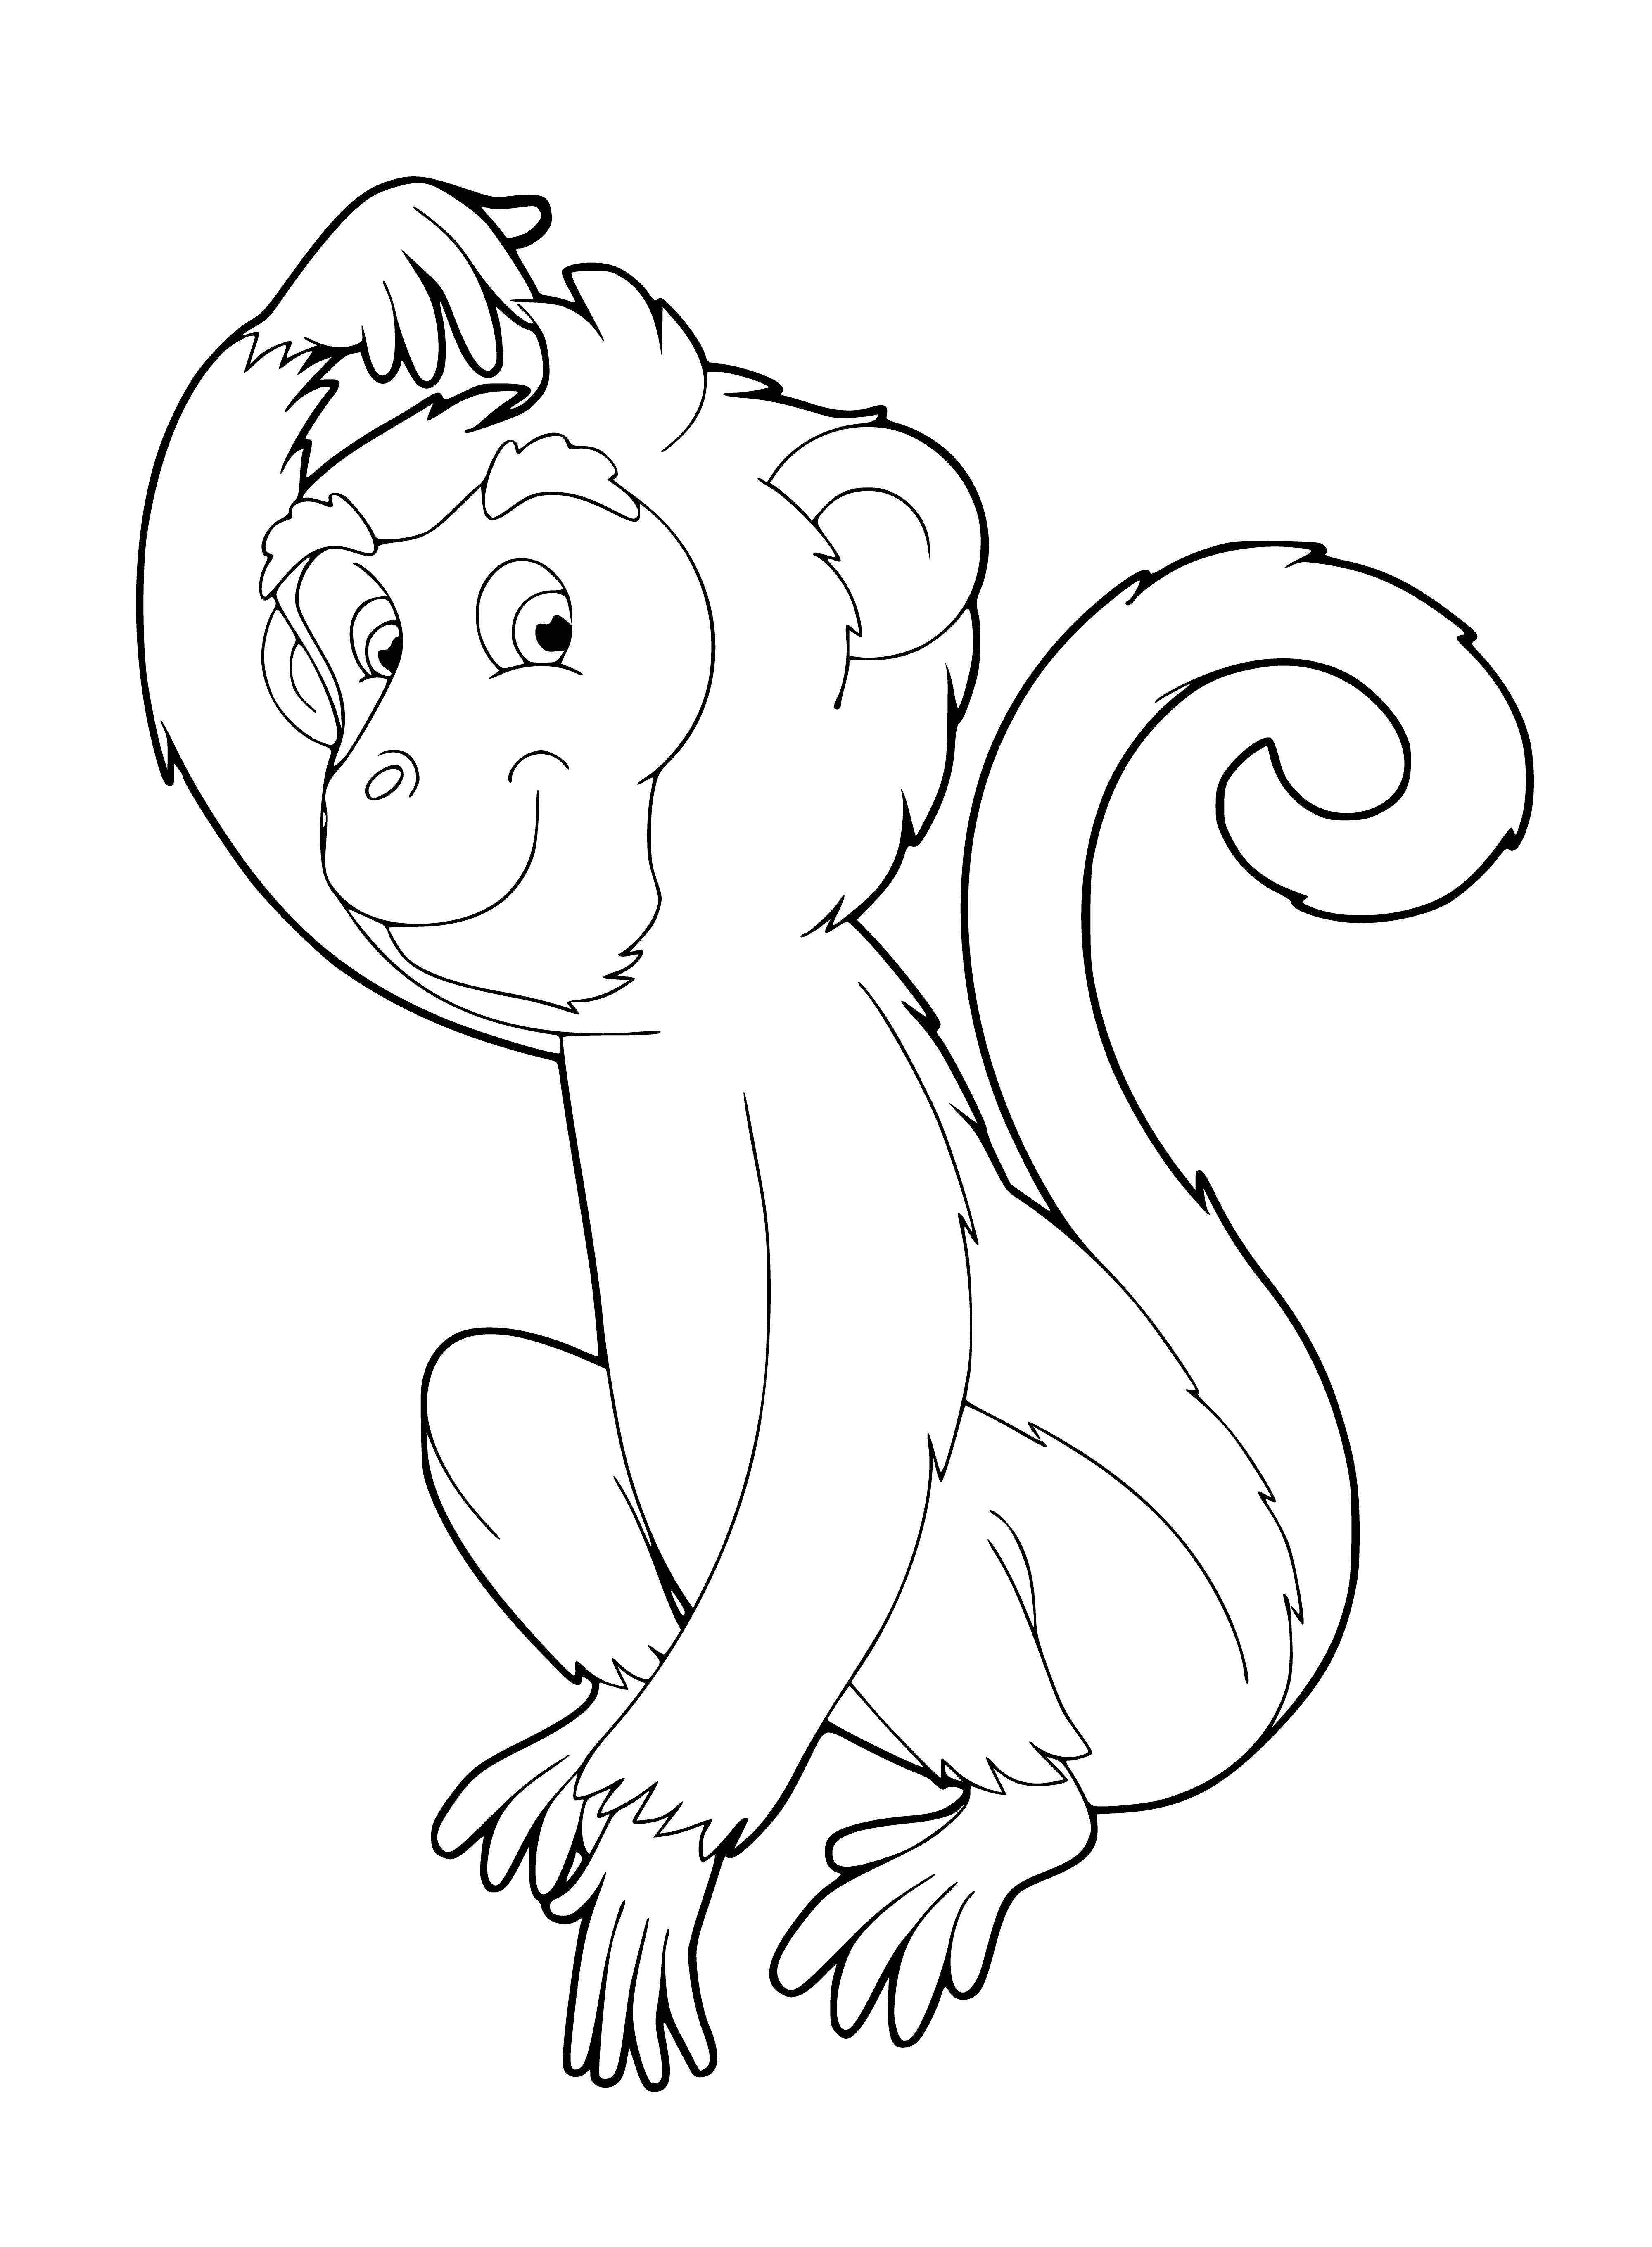 coloring page: Monkeys of various colors swing in a jungle, all with long tails & sharp teeth bared.